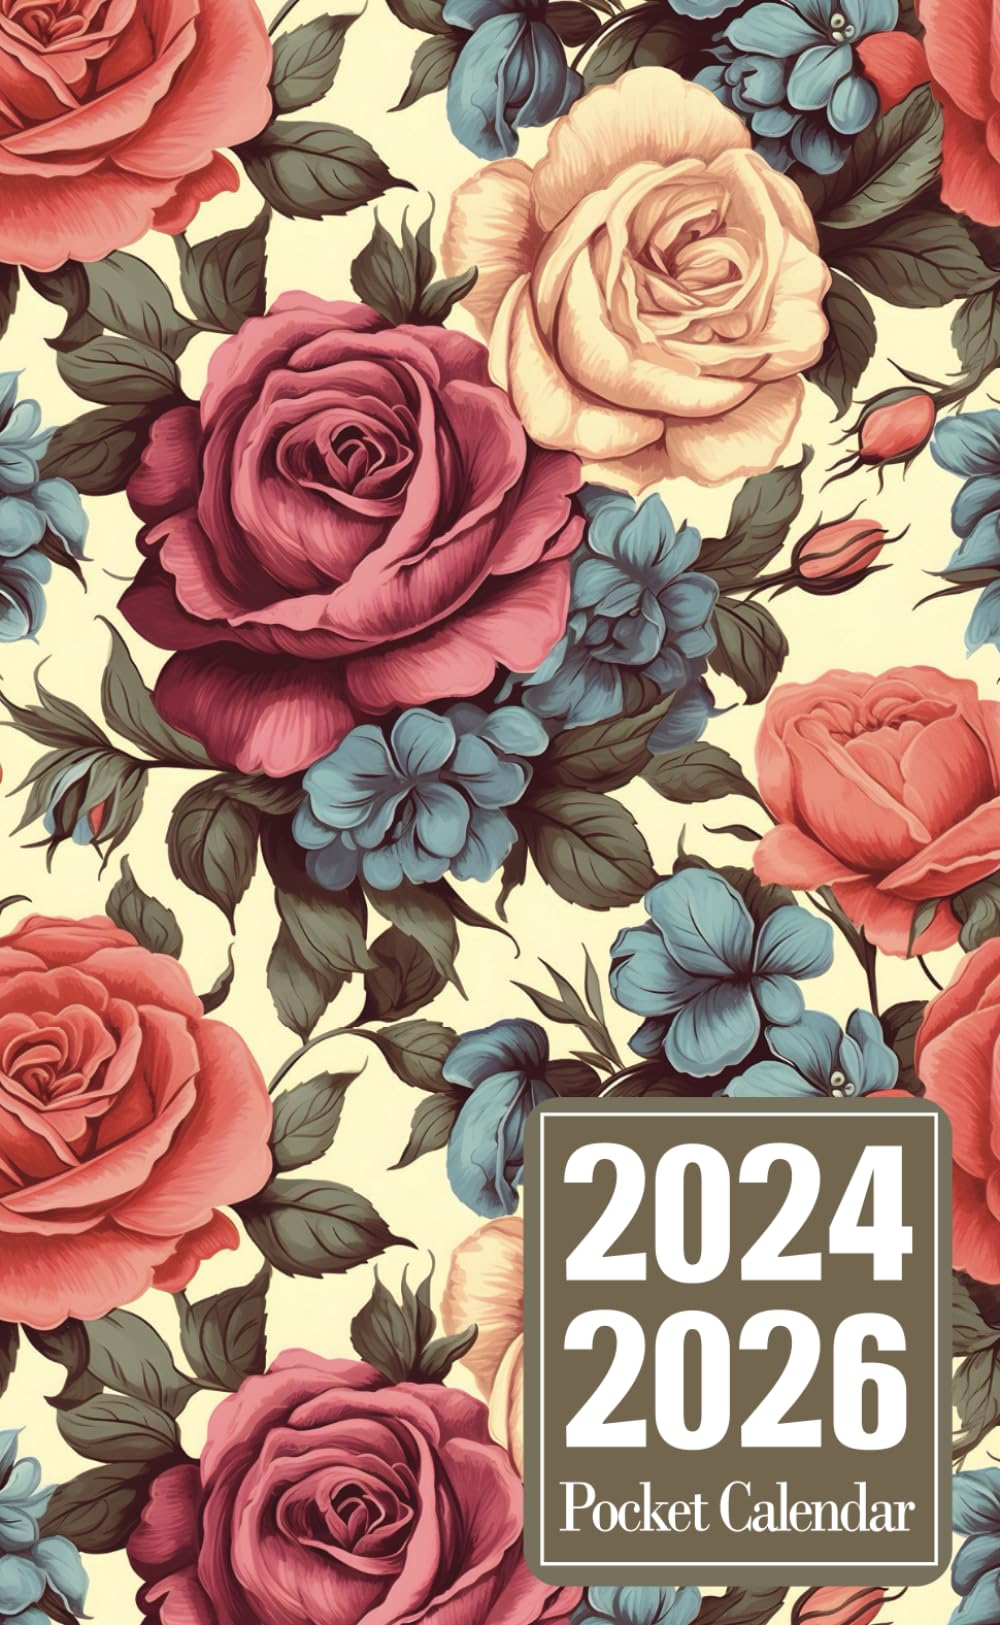 2024-2026 Pocket Calendar: 3 Year Monthly Planner for Purse from January 2024 to December 2026, Flower Cover.